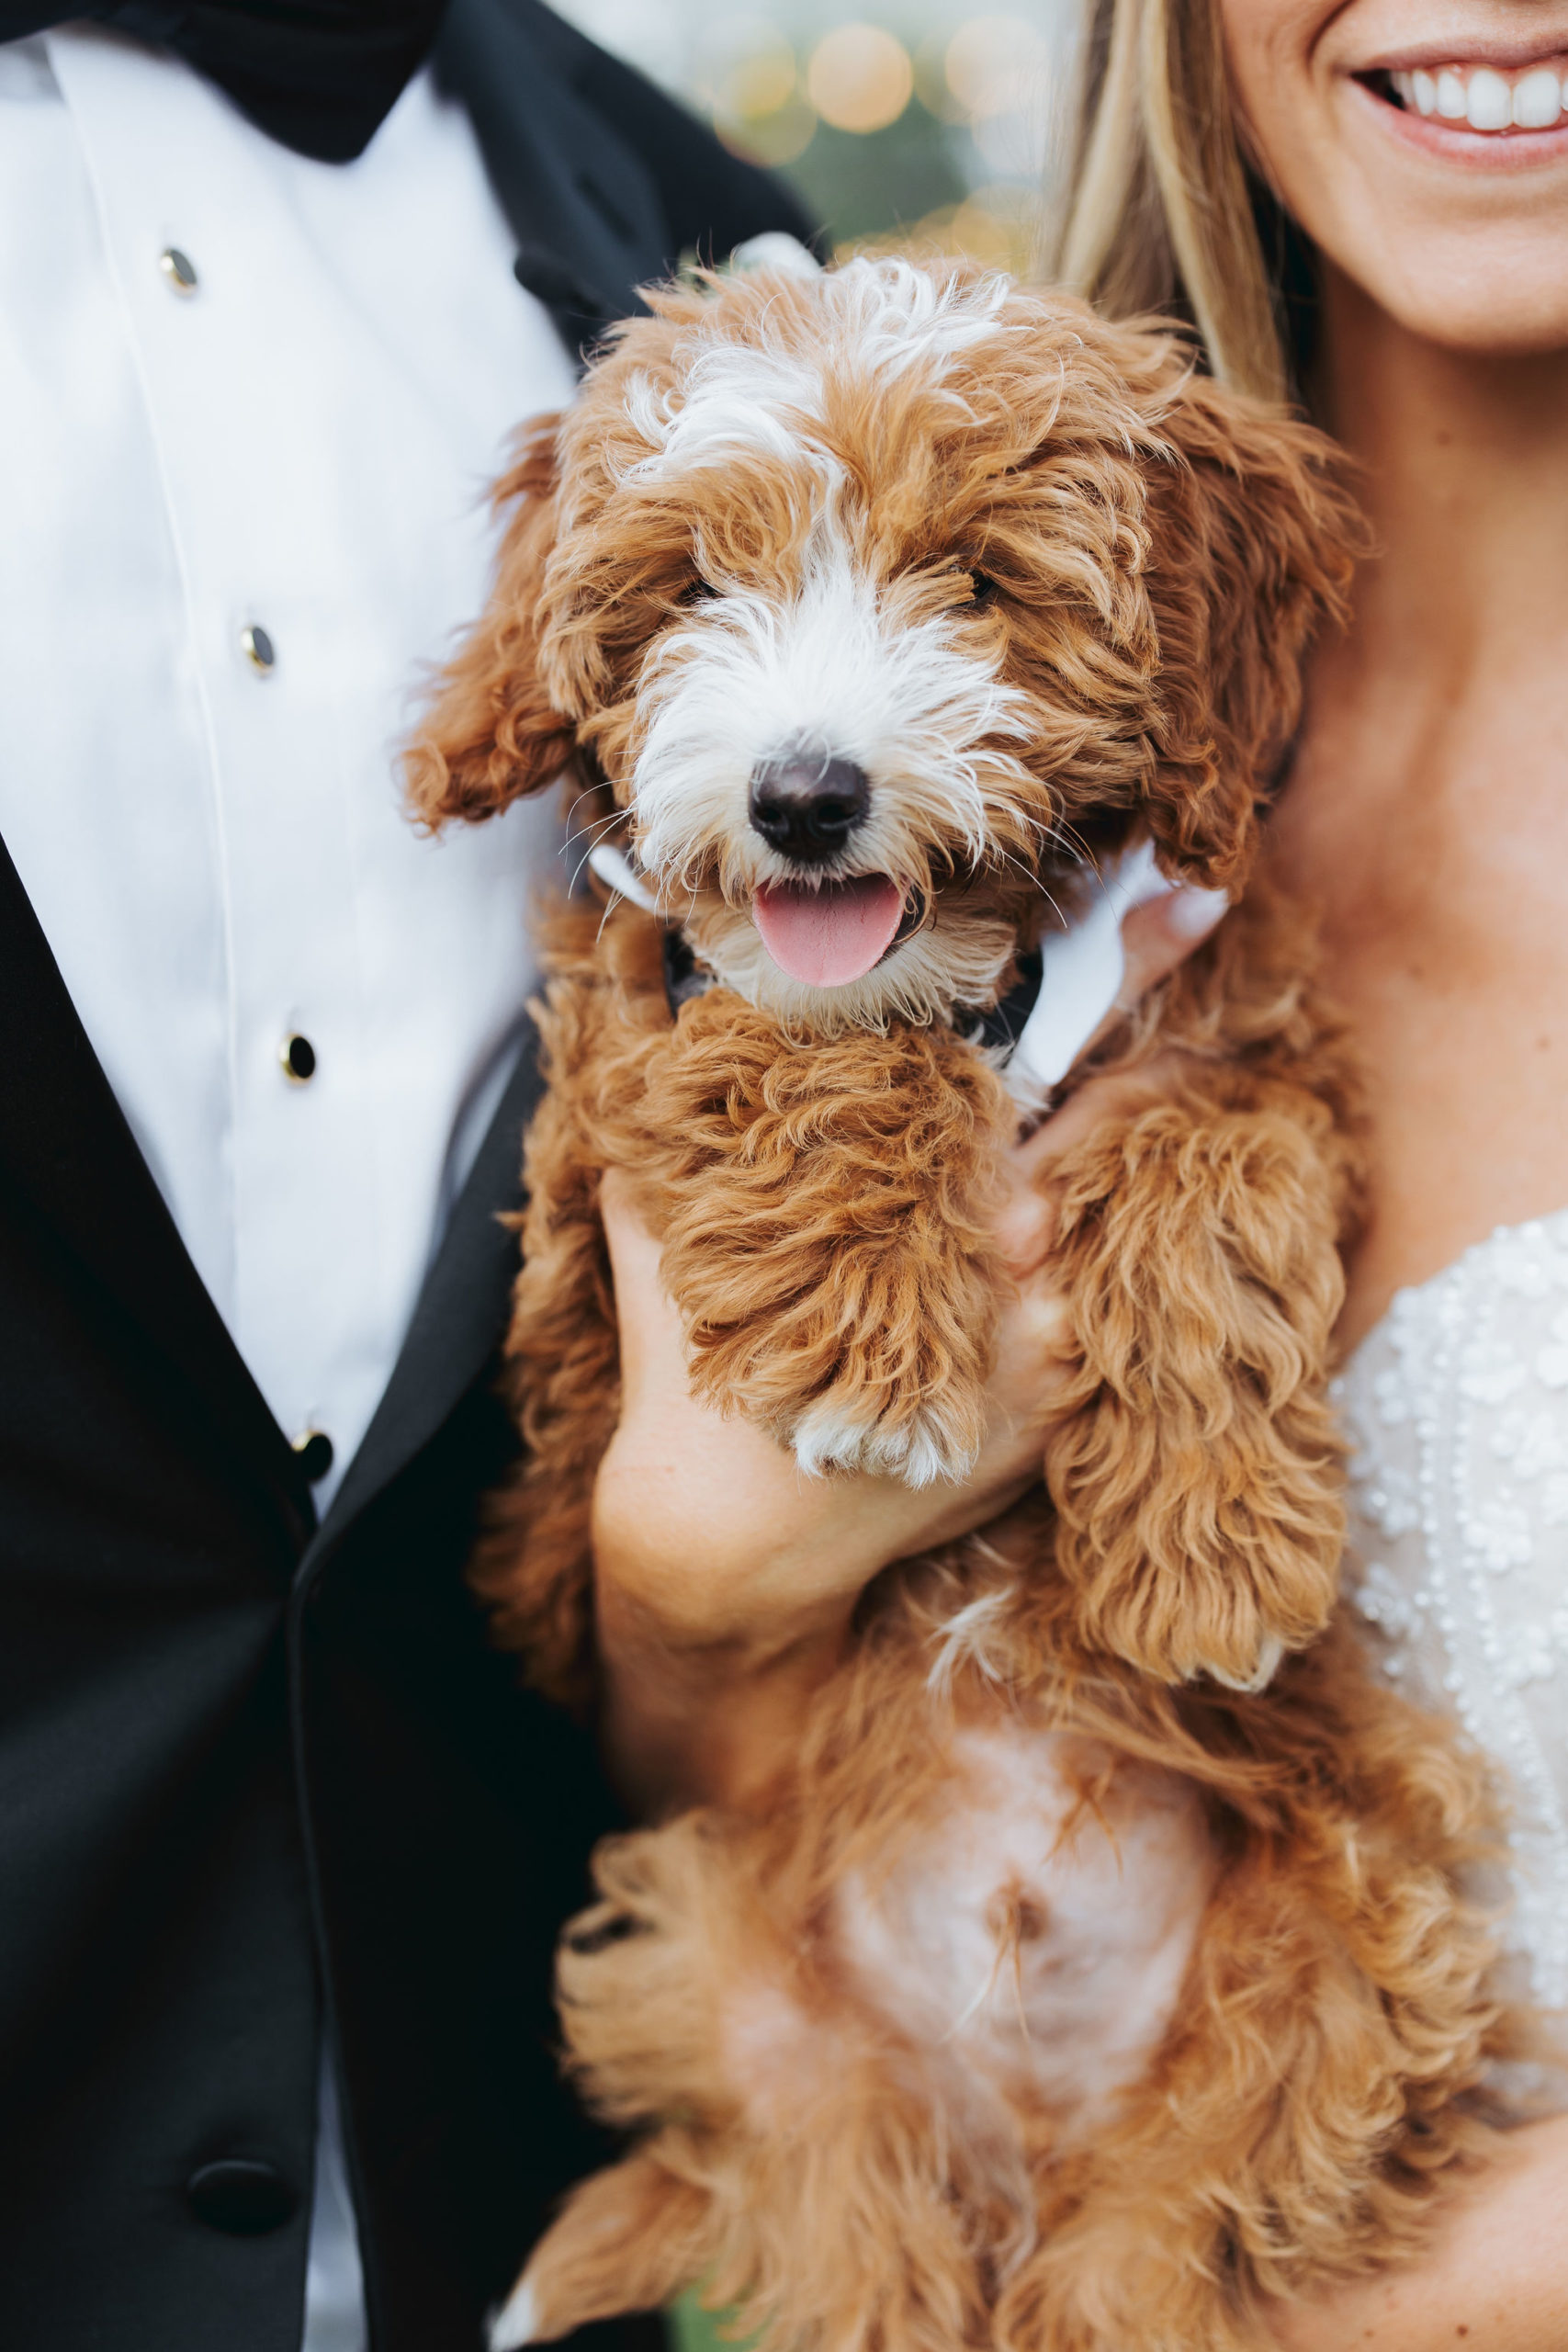 bride and groom holding puppy